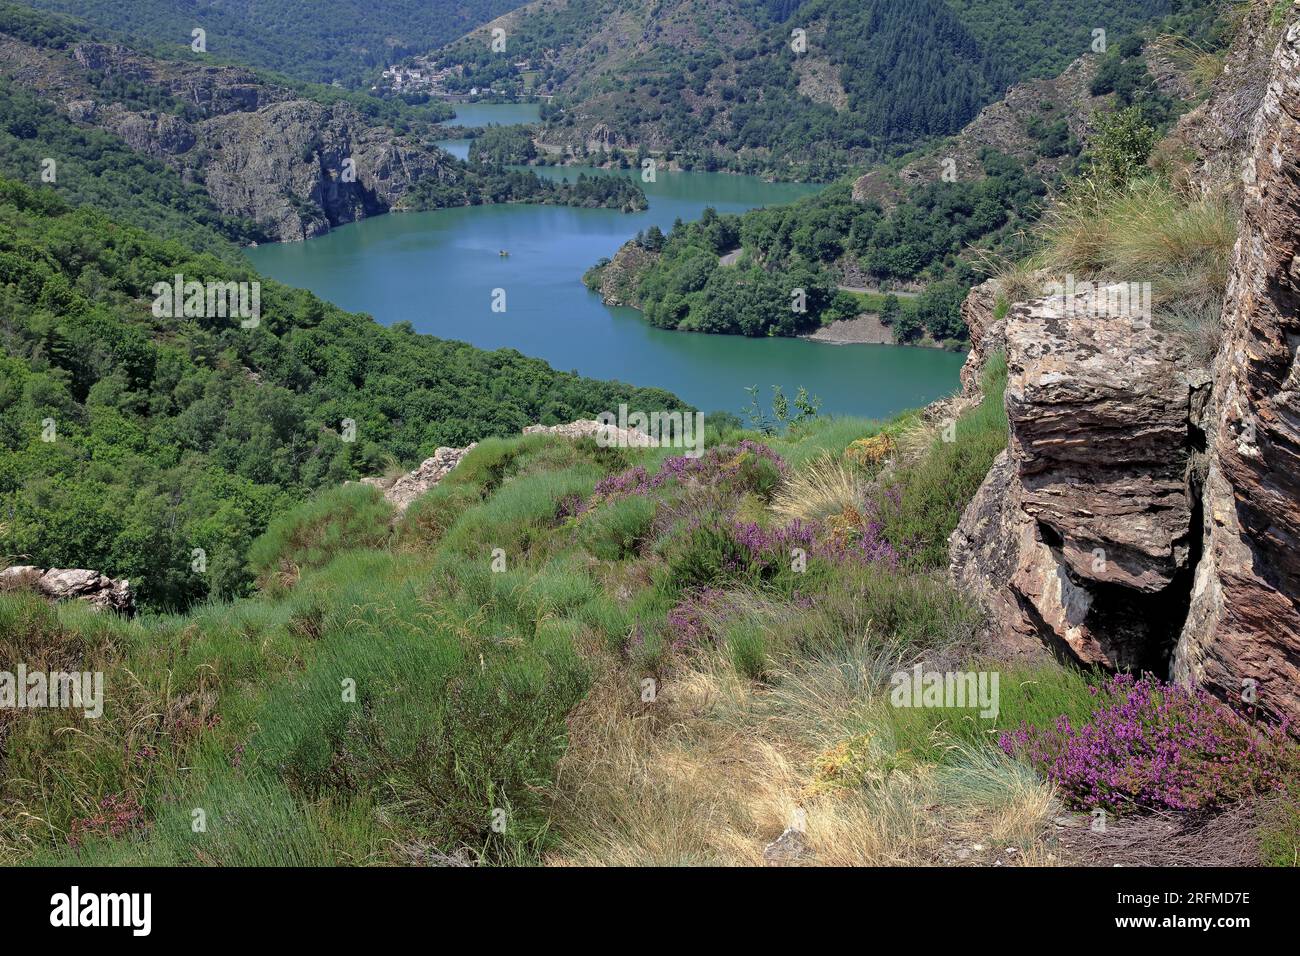 France, Lozère, Villefort, the lake, hydraulic reservoir, Altier viaduct (railway bridge), view from the surrounding mountain Stock Photo